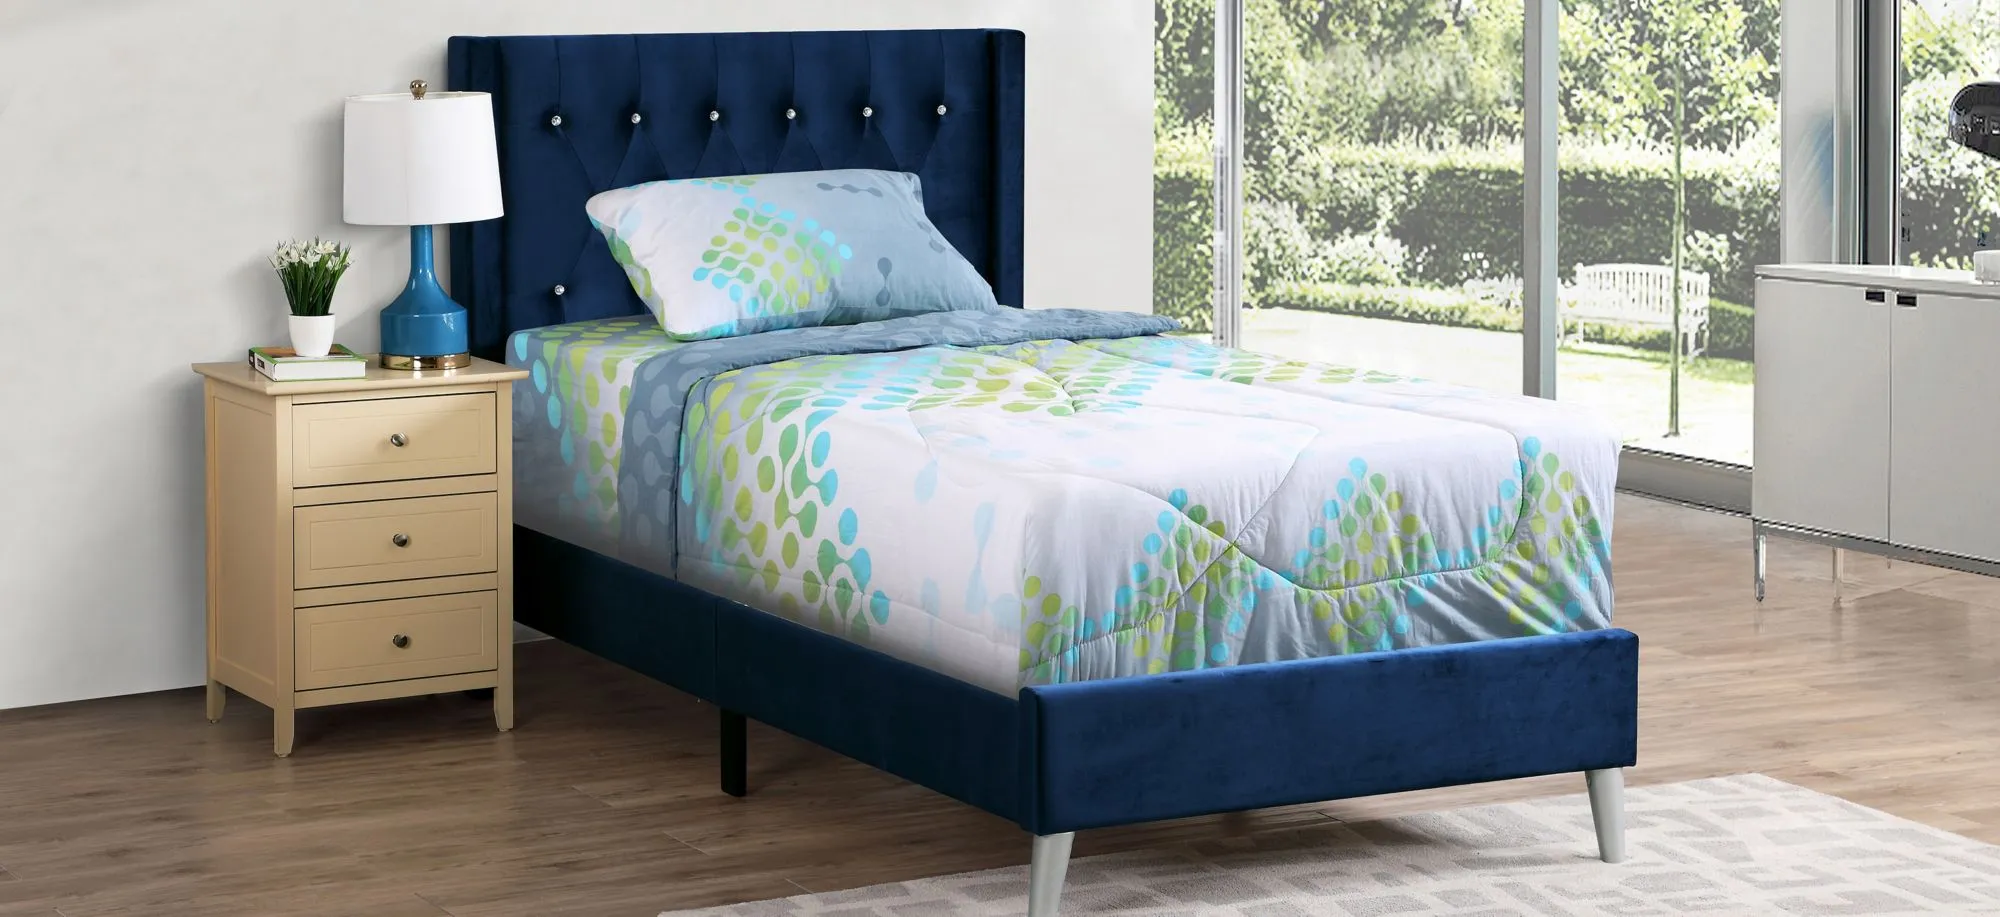 Glory Furniture Bergen Upholstered Panel Bed in Navy Blue by Glory Furniture